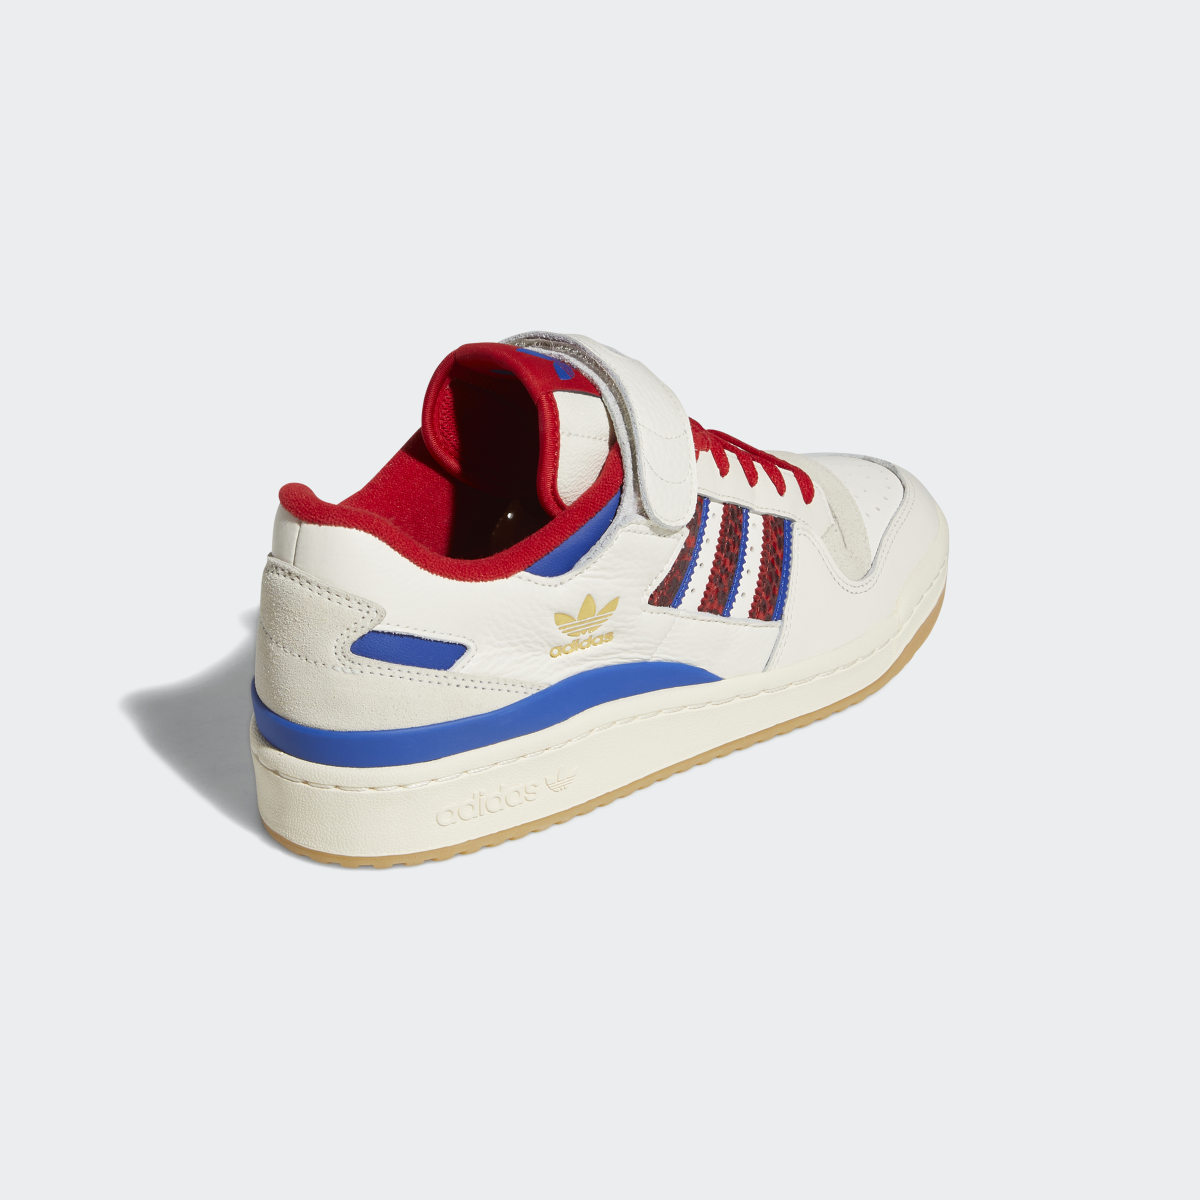 Adidas Forum 84 Low Shoes. 8